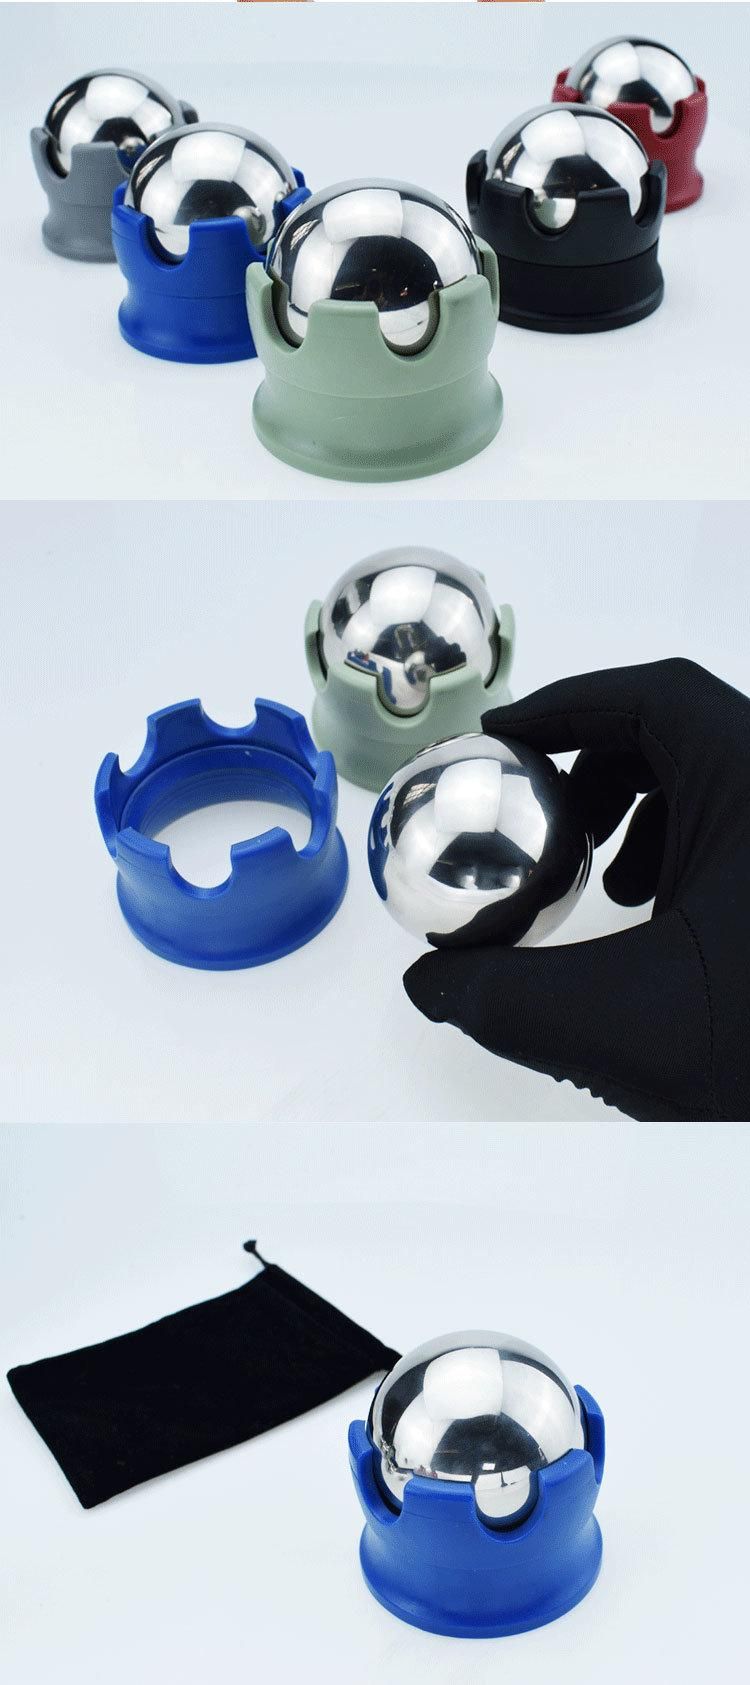 Health Product Stainless Steel Ice Ball Cold Roller Massage Ball